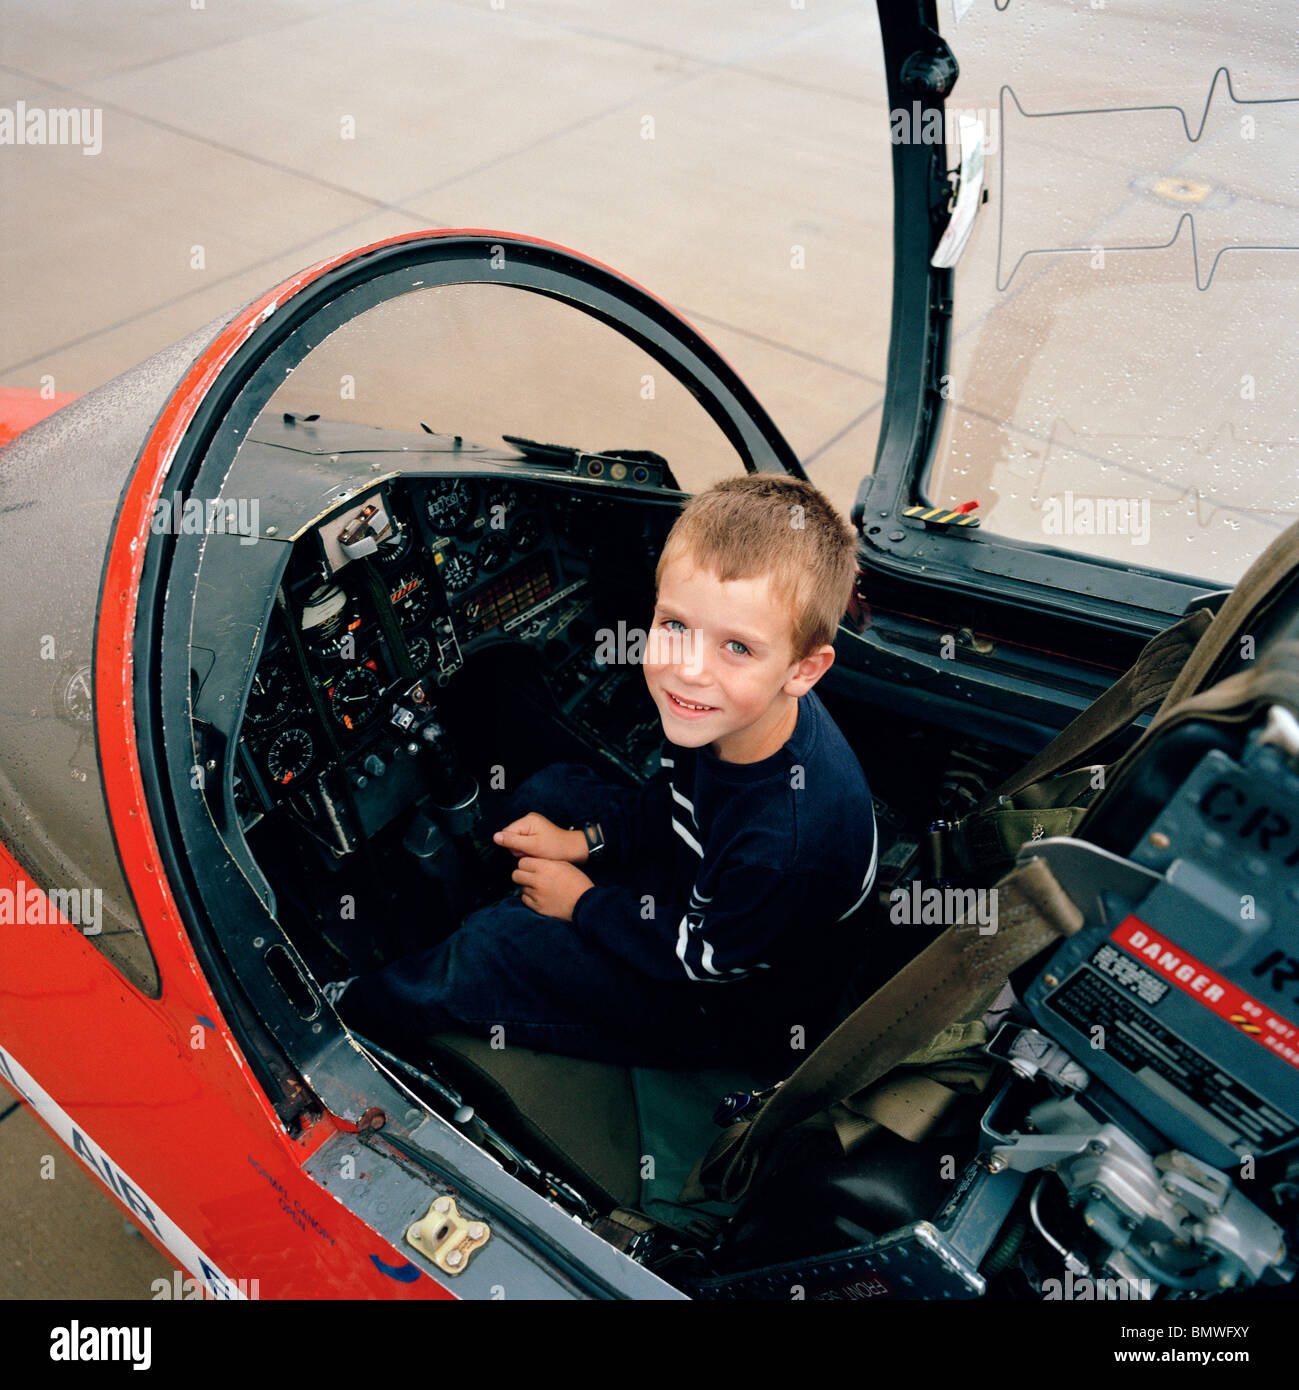 A young boy sits in BAE Systems Hawk cockpit of the 'Red Arrows', Britain's Royal Air Force aerobatic team. Stock Photo